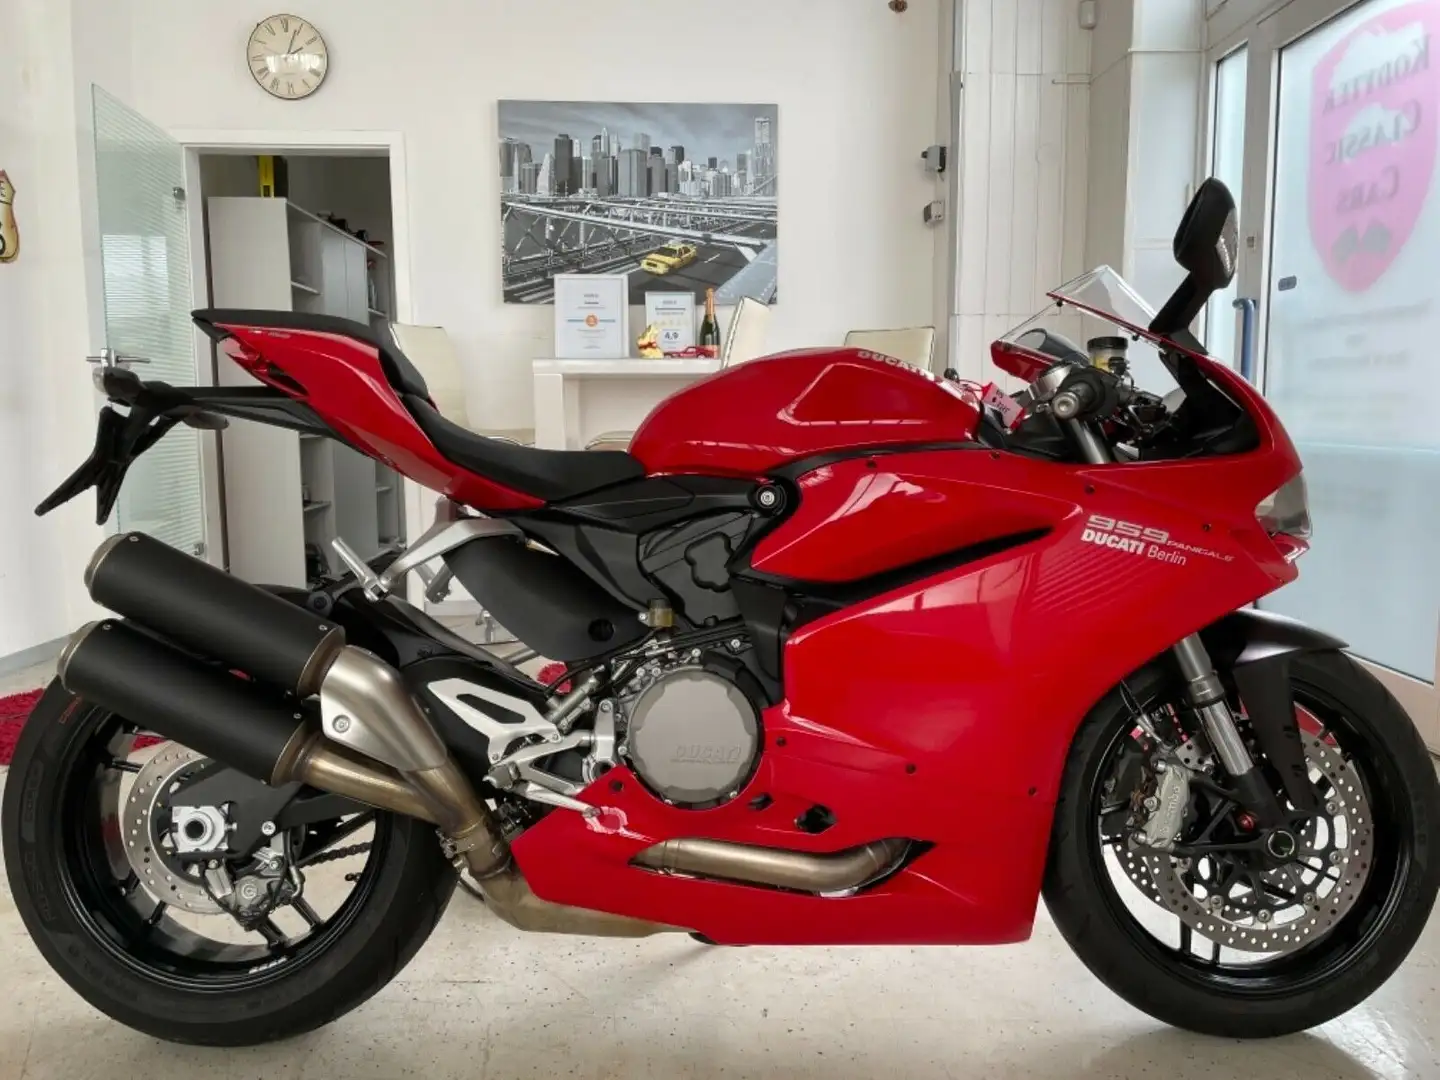 Ducati Panigale 959 Red - 2